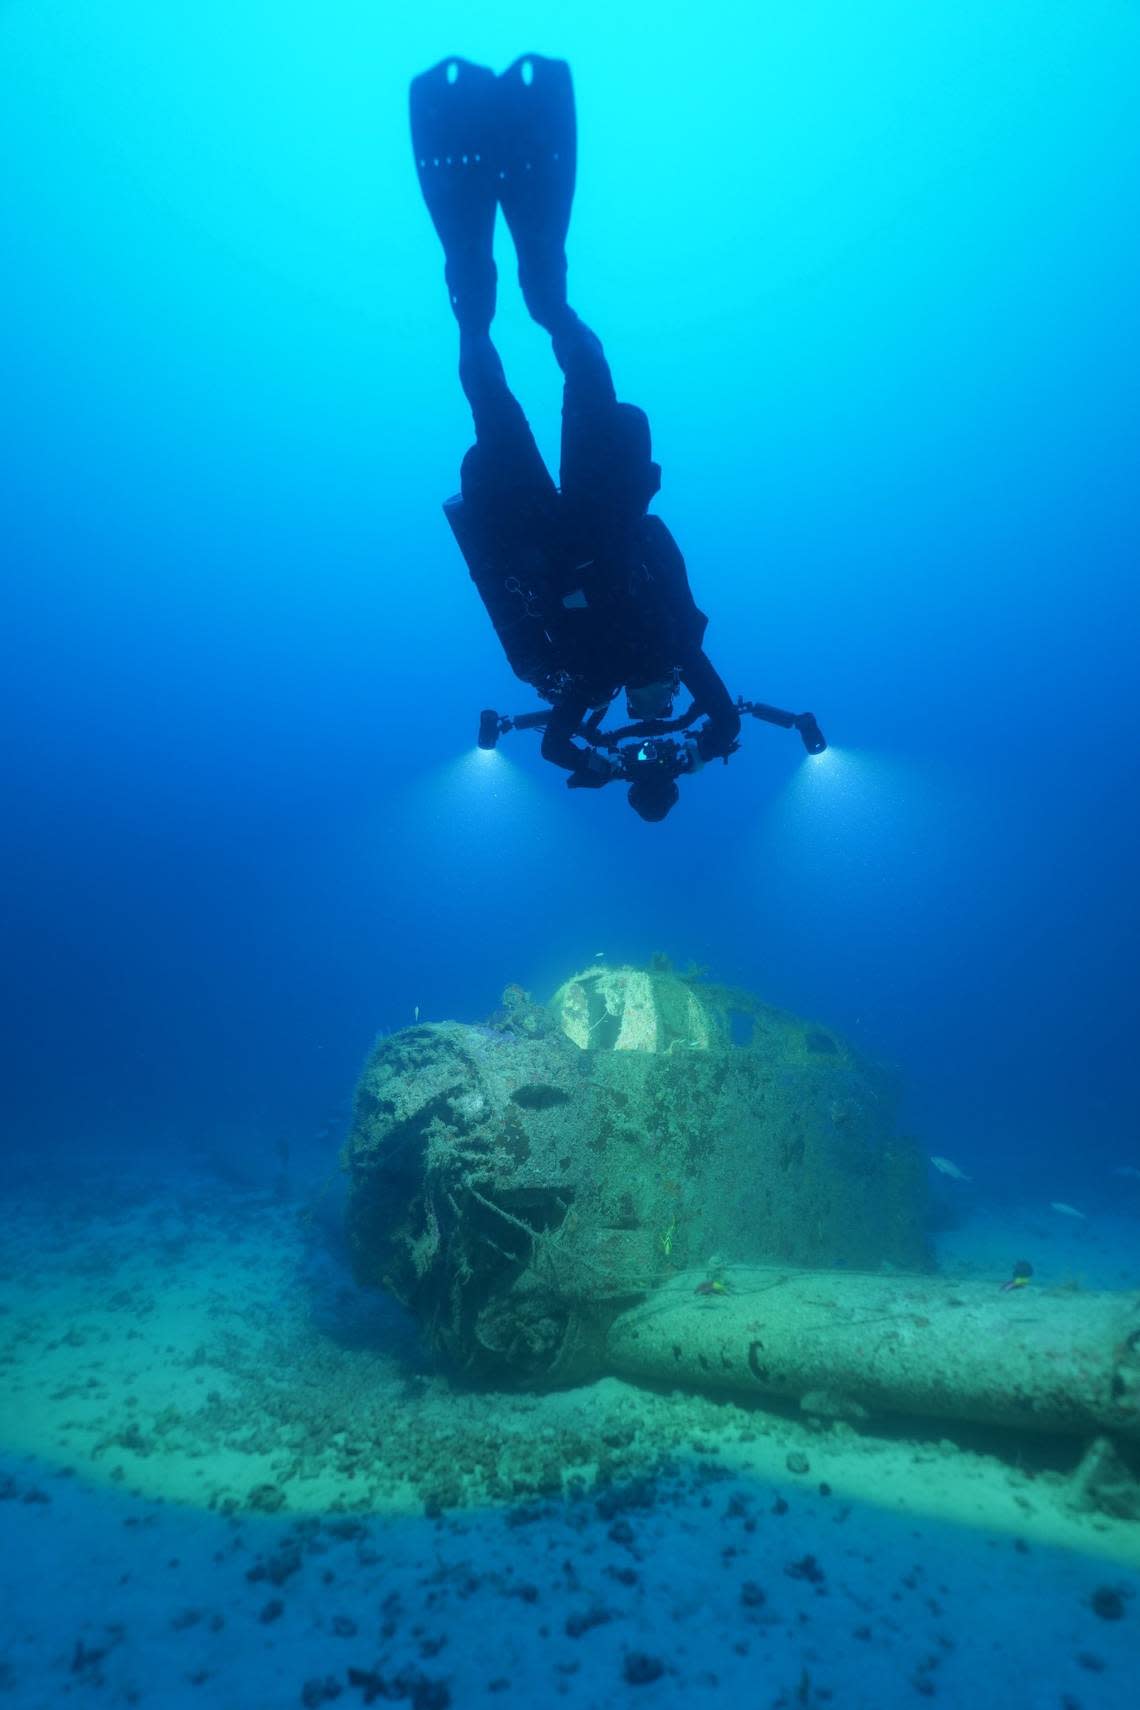 A diver swims above the wreckage of a U.S. Marine Corps Douglas AD-5 Skyraider plane sitting at the bottom of the ocean off Key Biscayne.